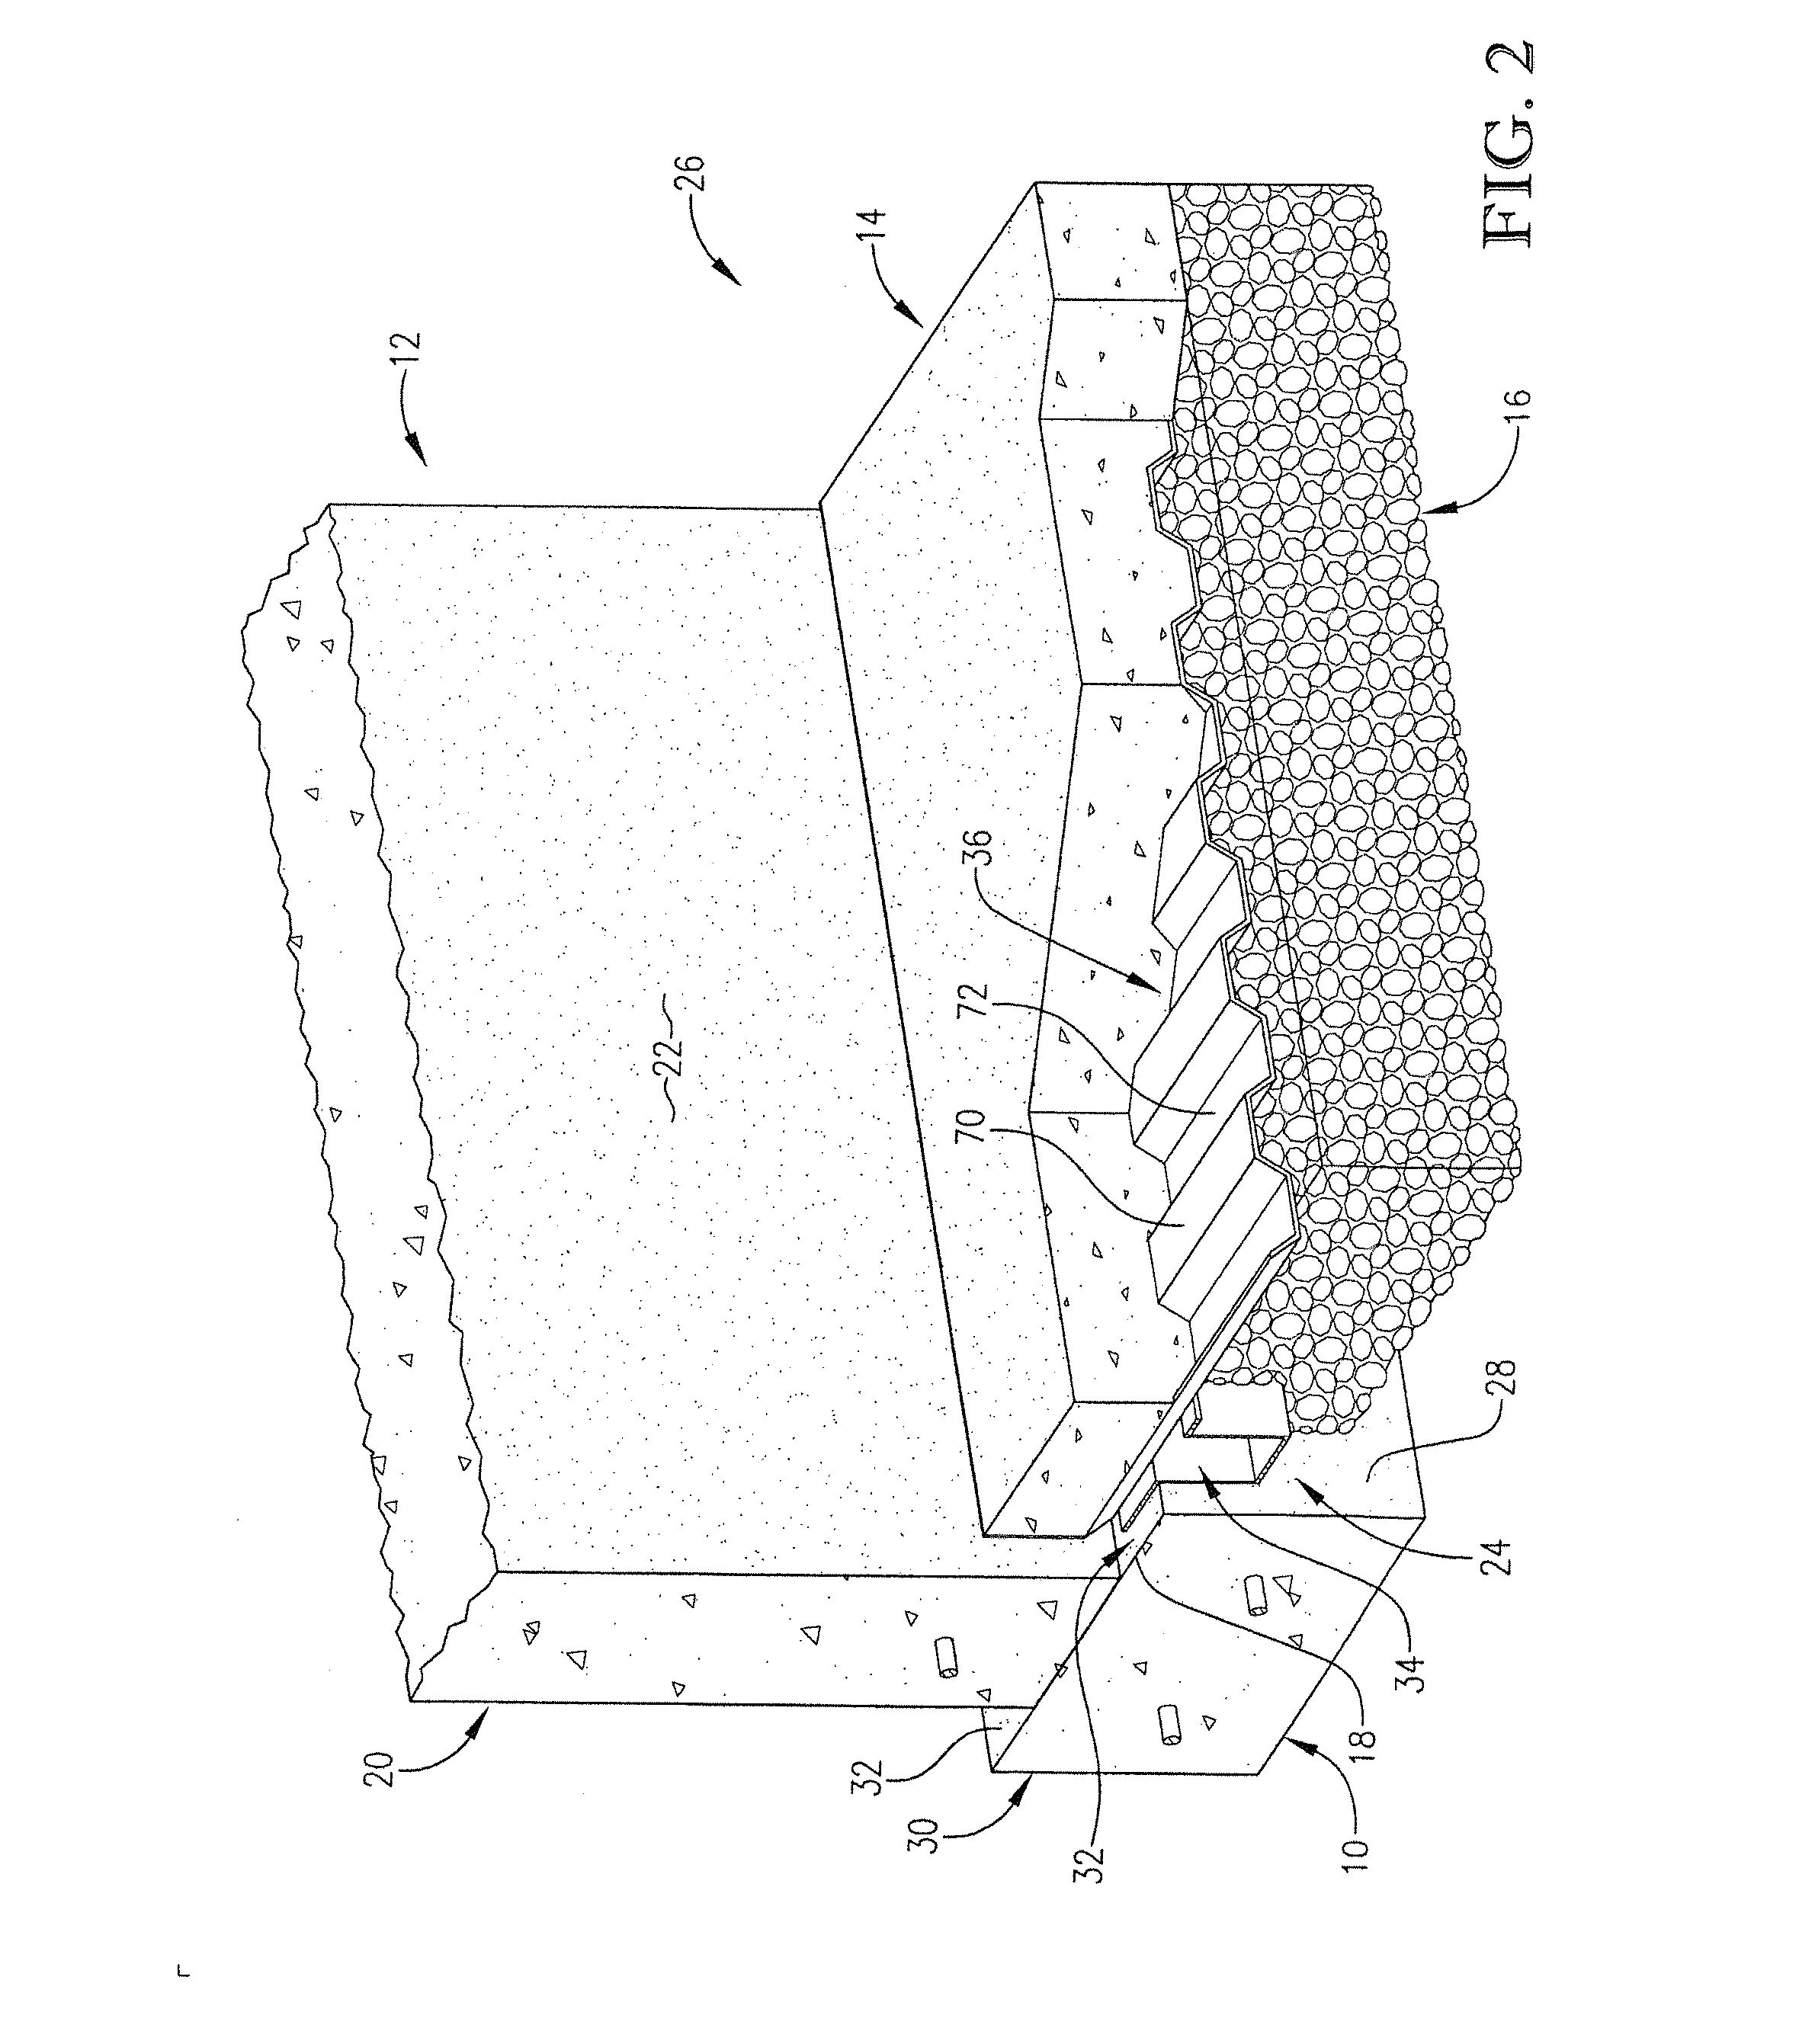 Apparatus and method for diverting water at basement joints